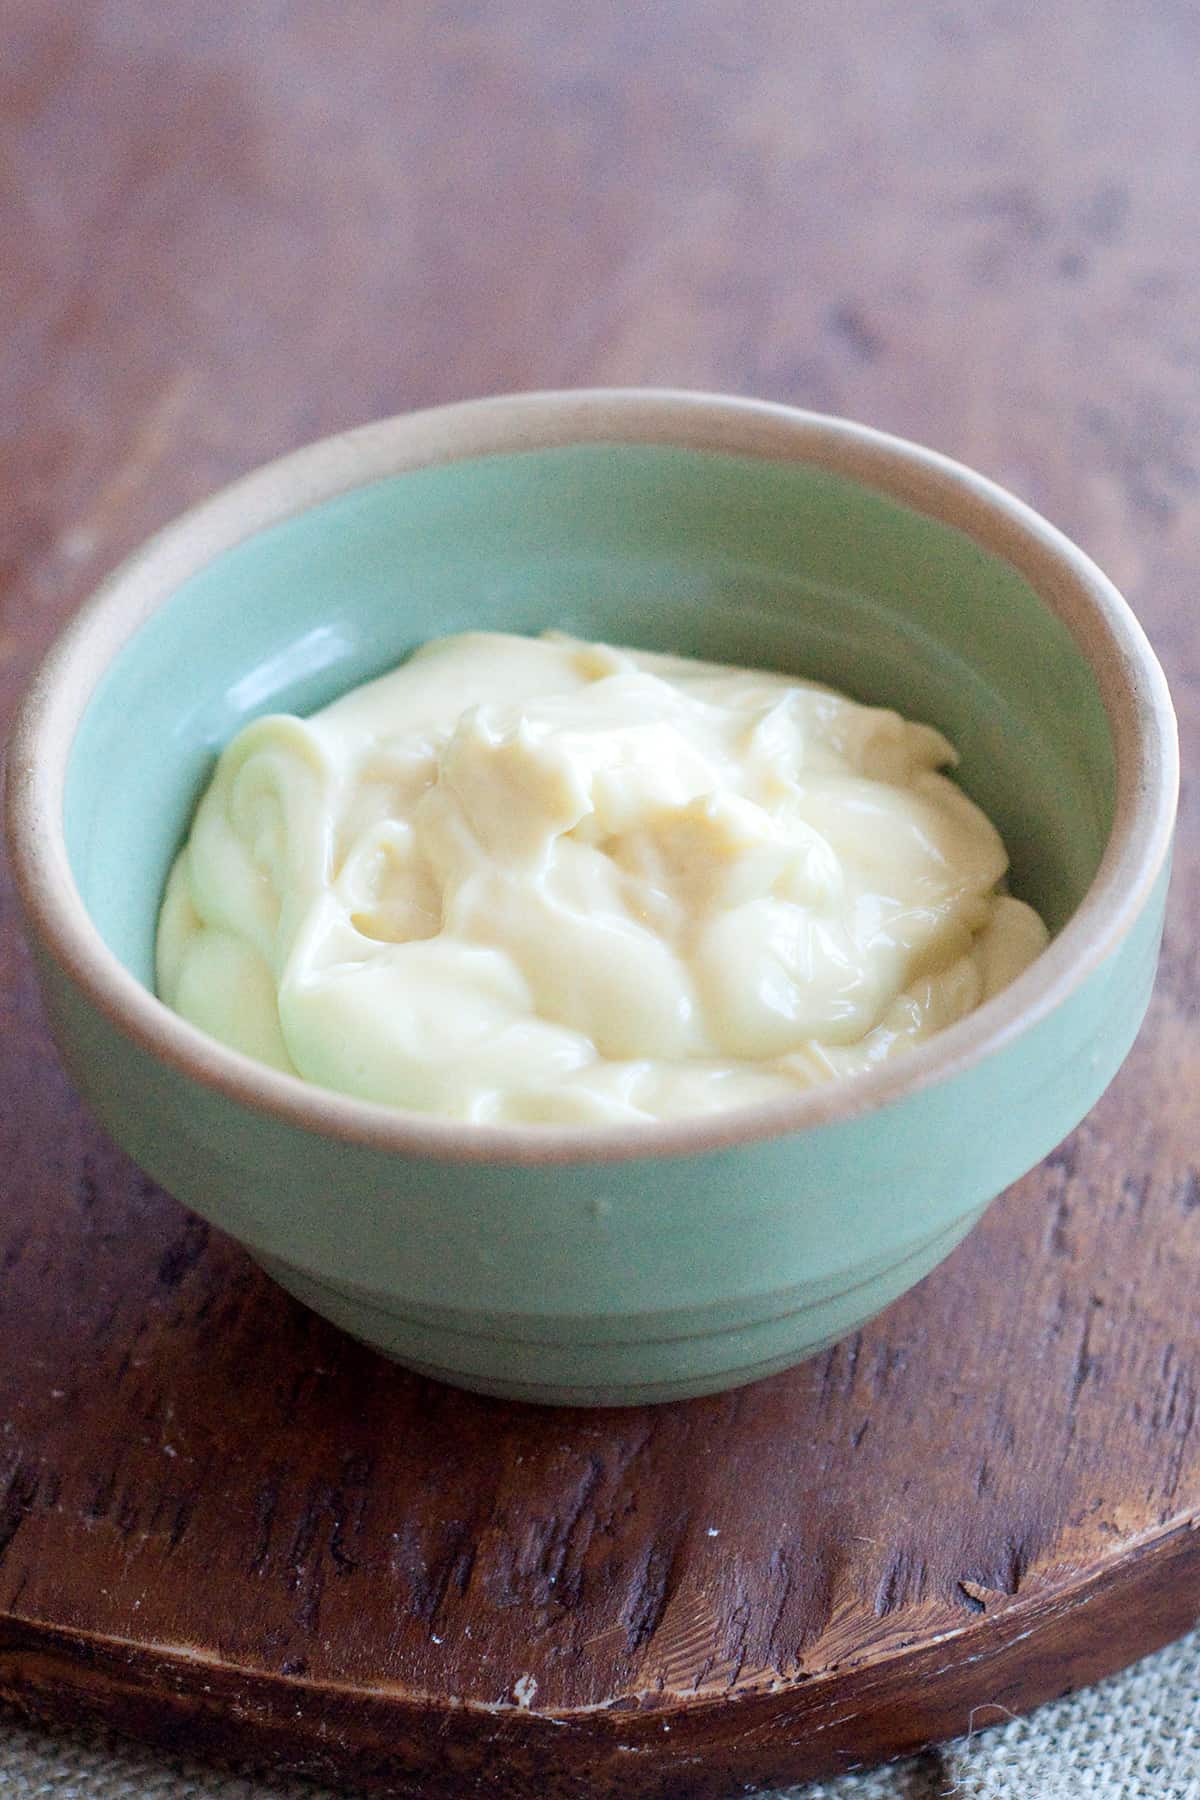 Finished homemade mayonnaise in a green vintage bowl.